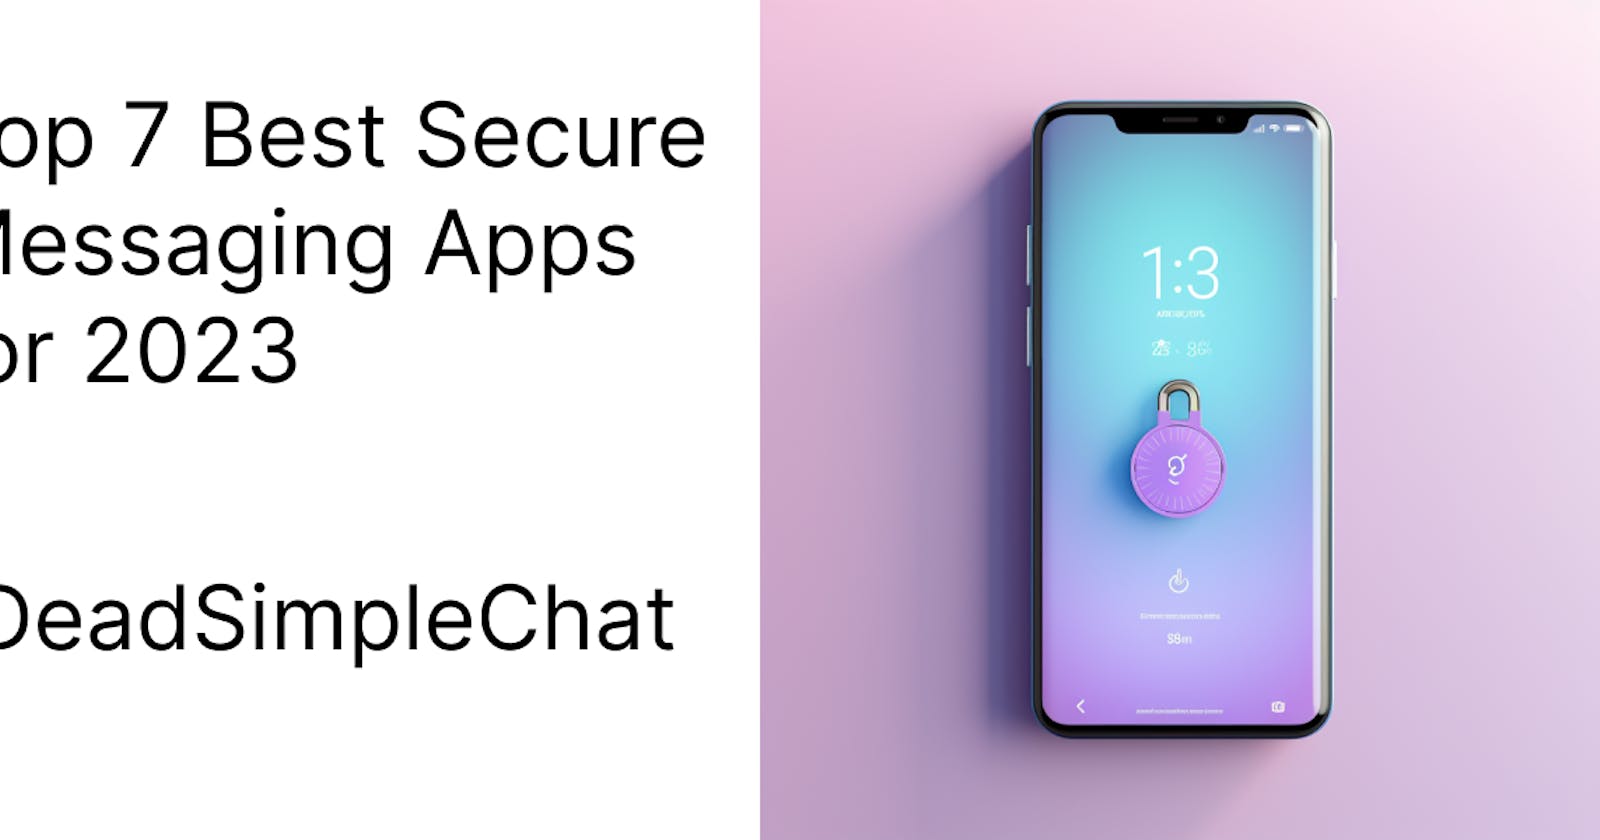 Top 7 Best Secure Messaging Apps for 2023